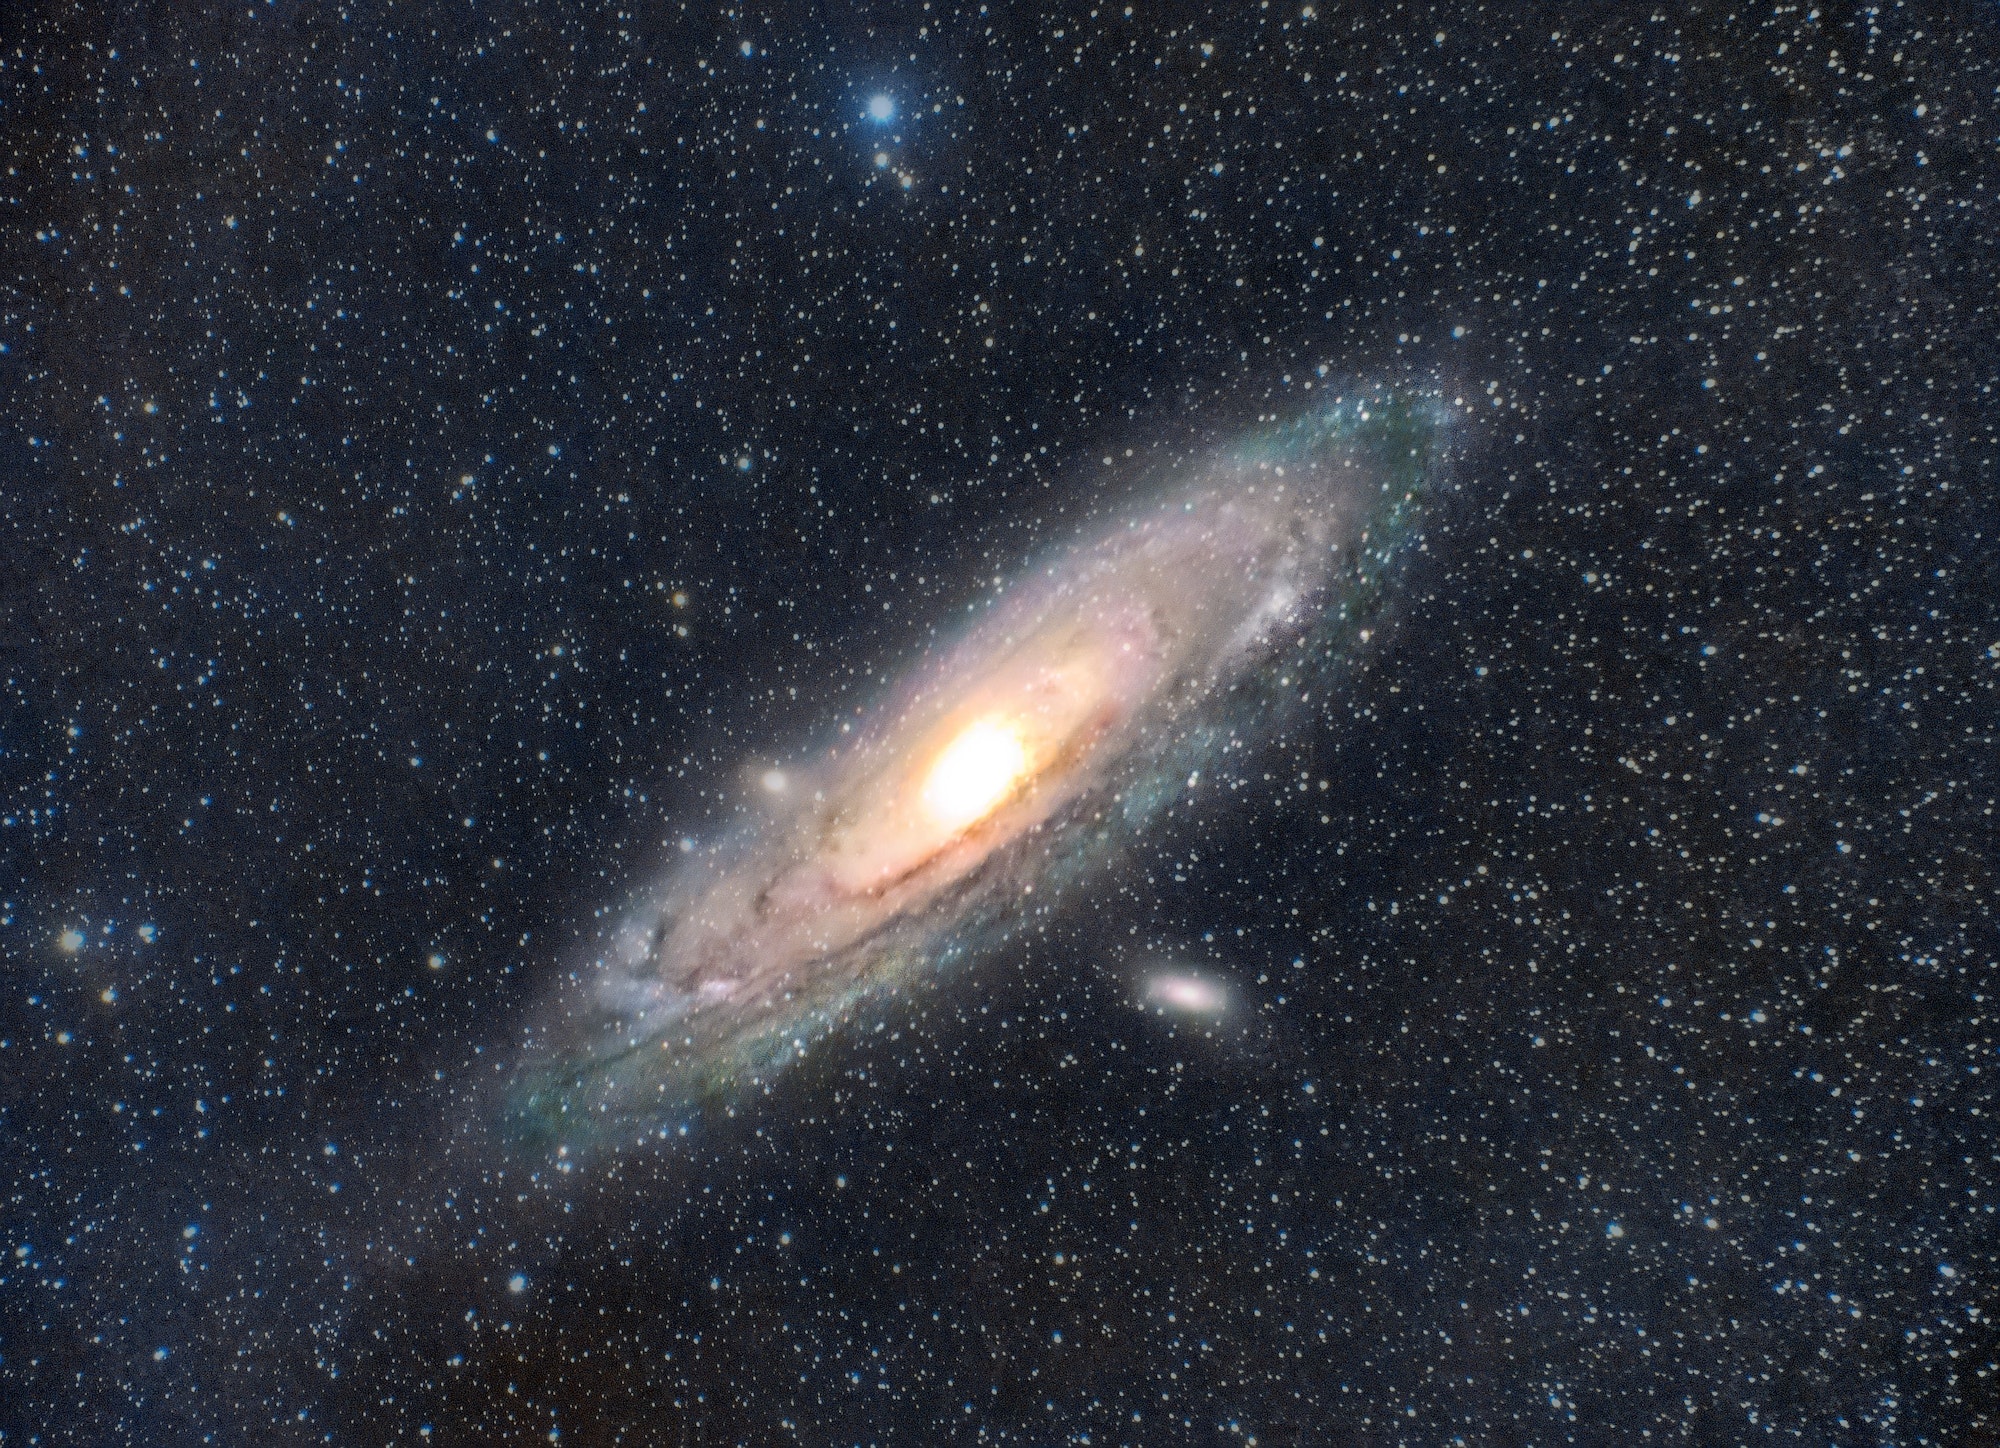 Andromeda galaxy surrounded by stars